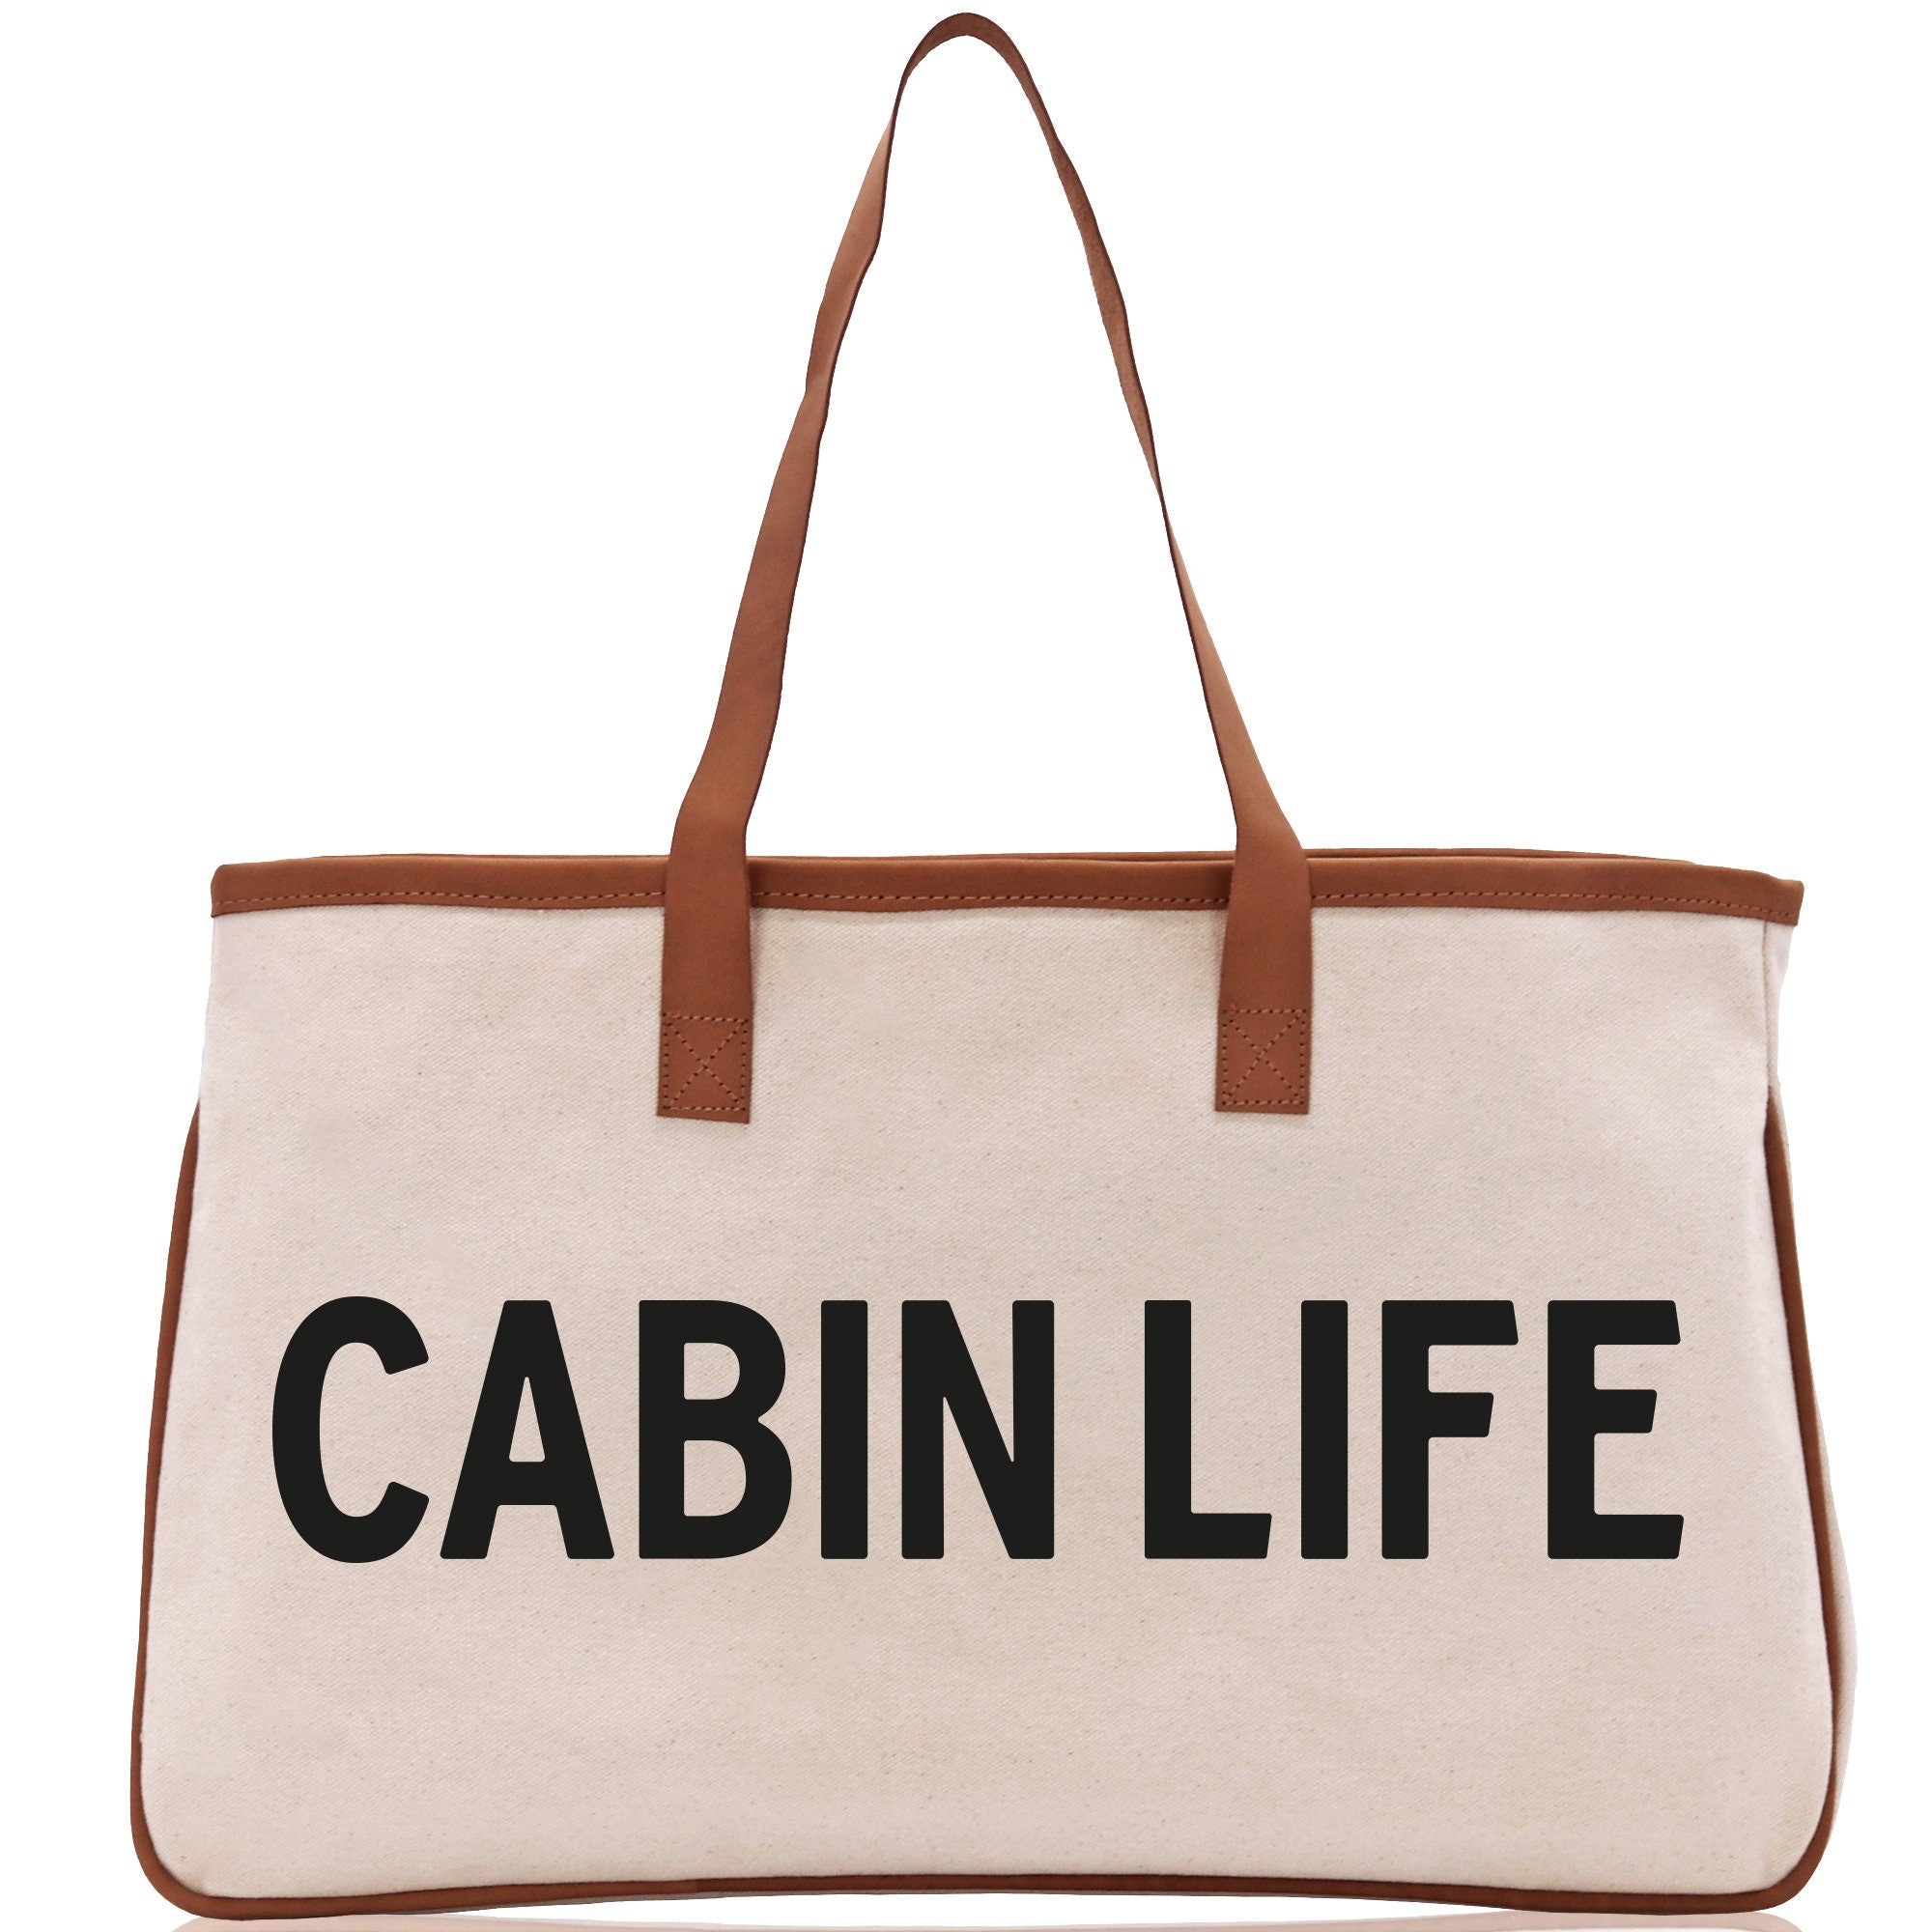 Cabin Life Cotton Canvas Chic Tote Bag Camping Tote Camping Lover Gift Tote Bag Outdoor Tote Weekender Tote Camper Tote Multipurpose Tote